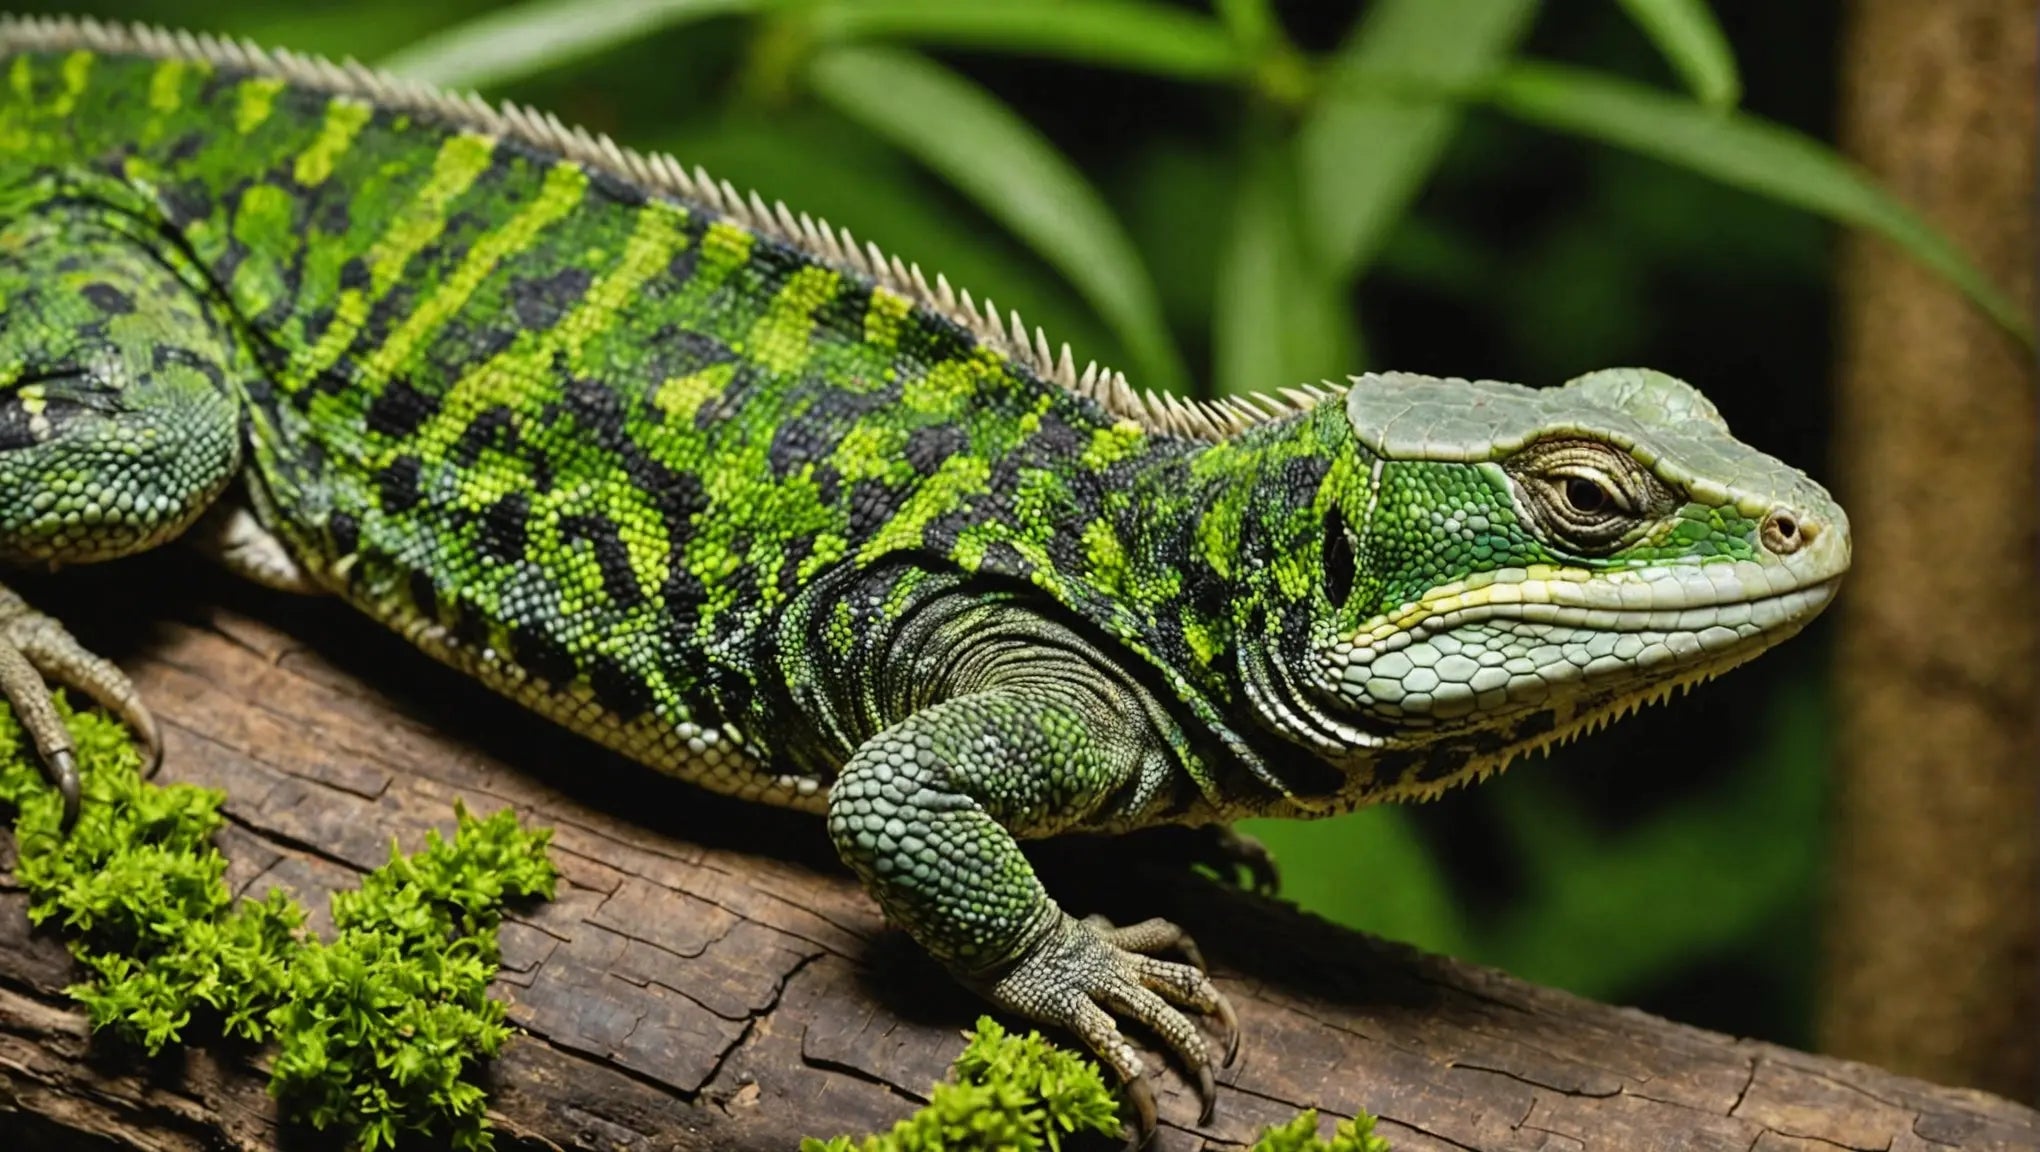 Enhance Your Reptile's Diet with Live Reptile Food